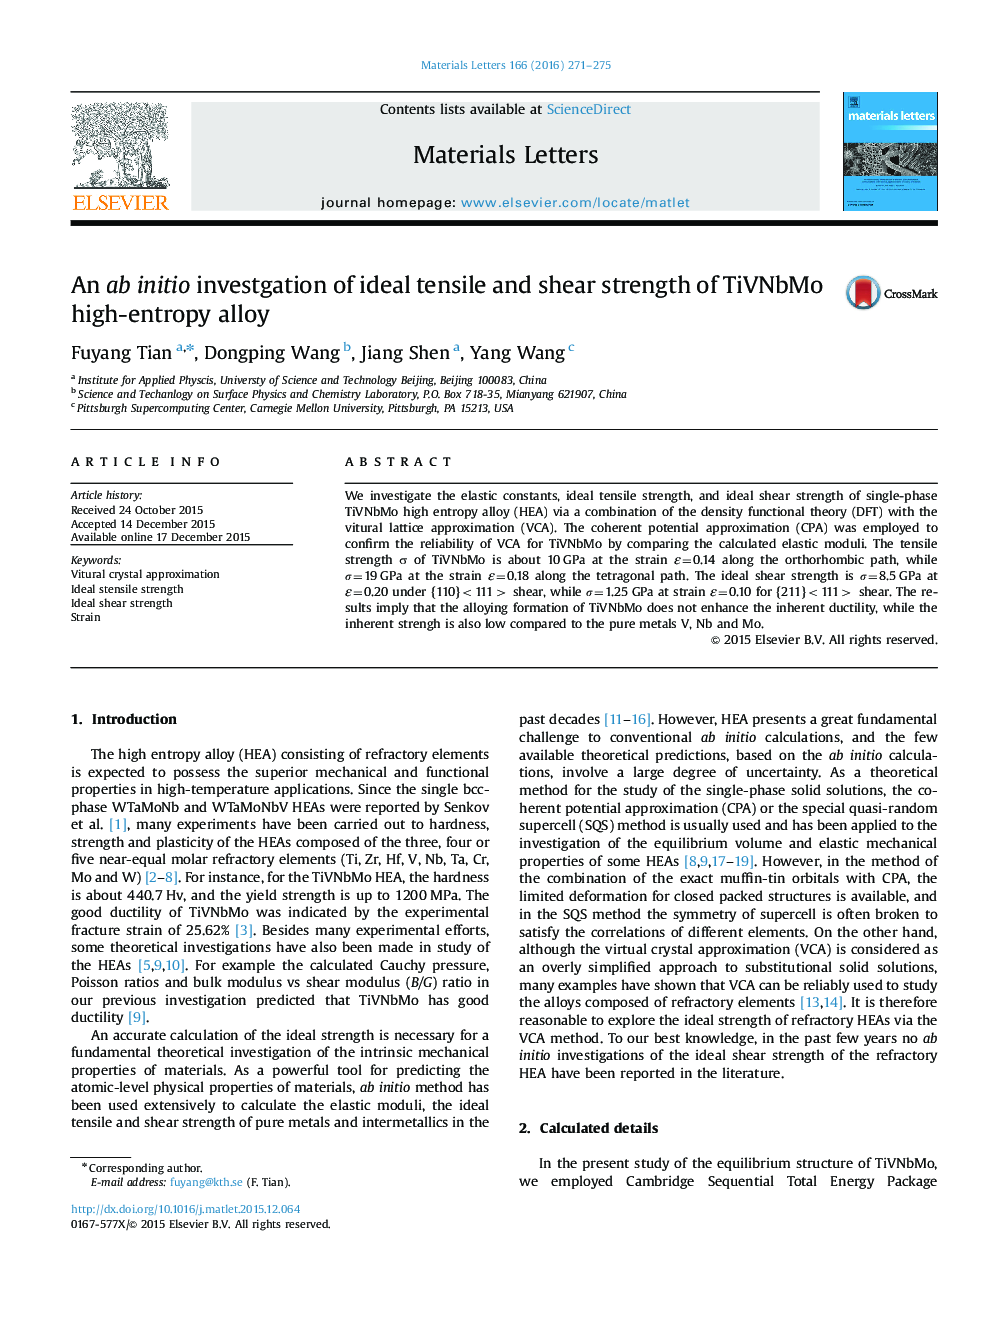 An ab initio investgation of ideal tensile and shear strength of TiVNbMo high-entropy alloy